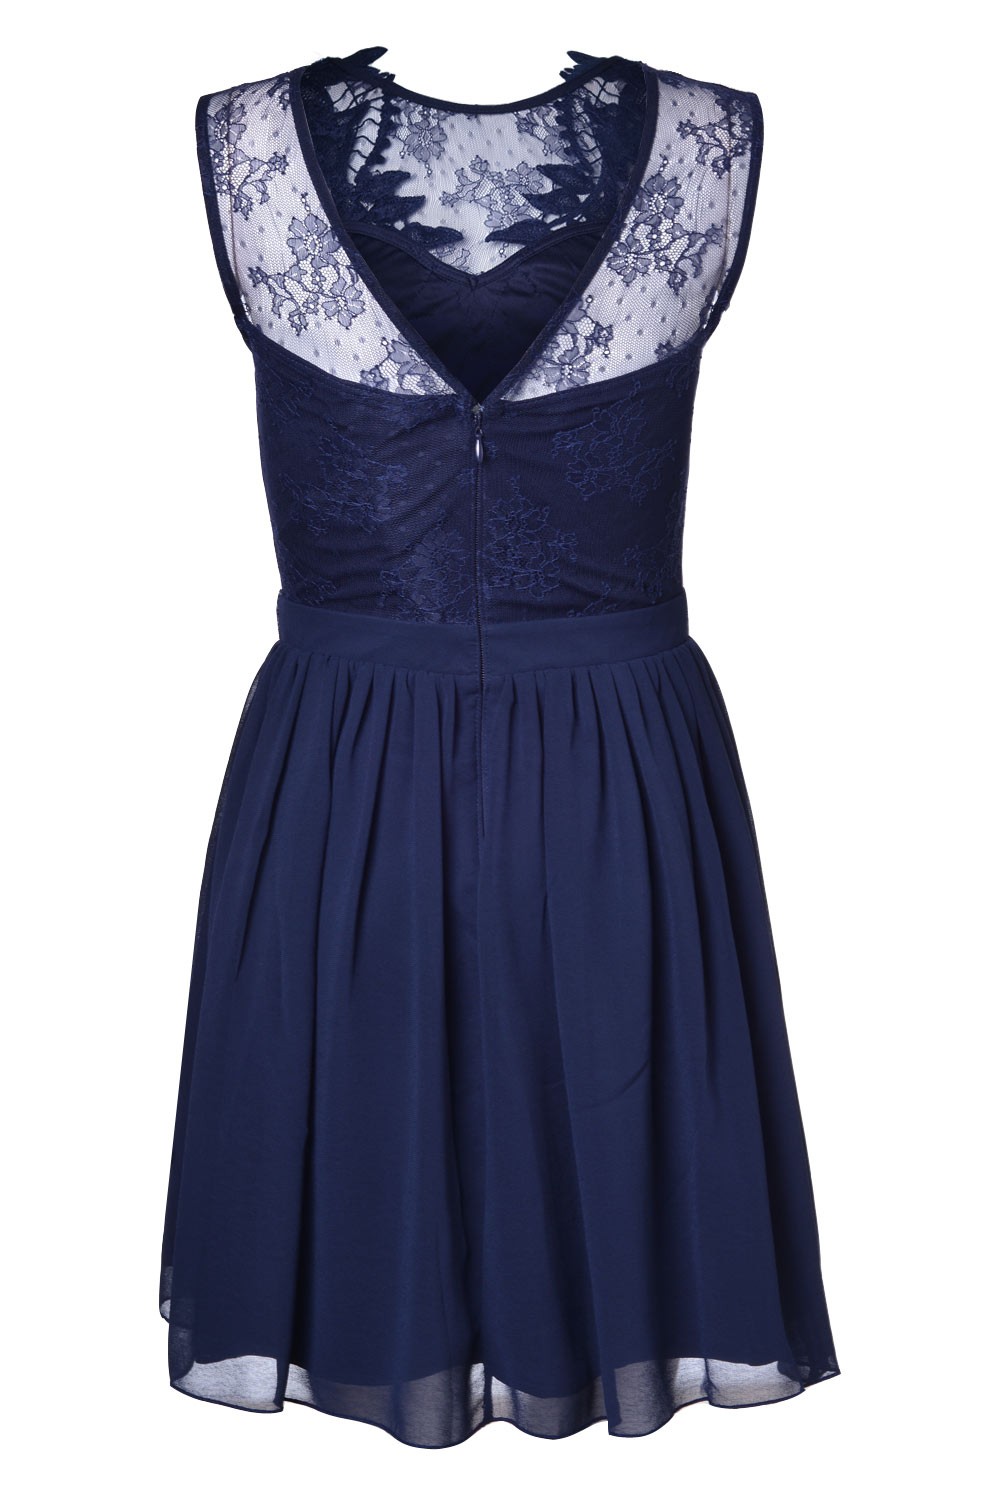 Lipsy Lipsy Lace Top Prom Dress in Navy | iCLOTHING